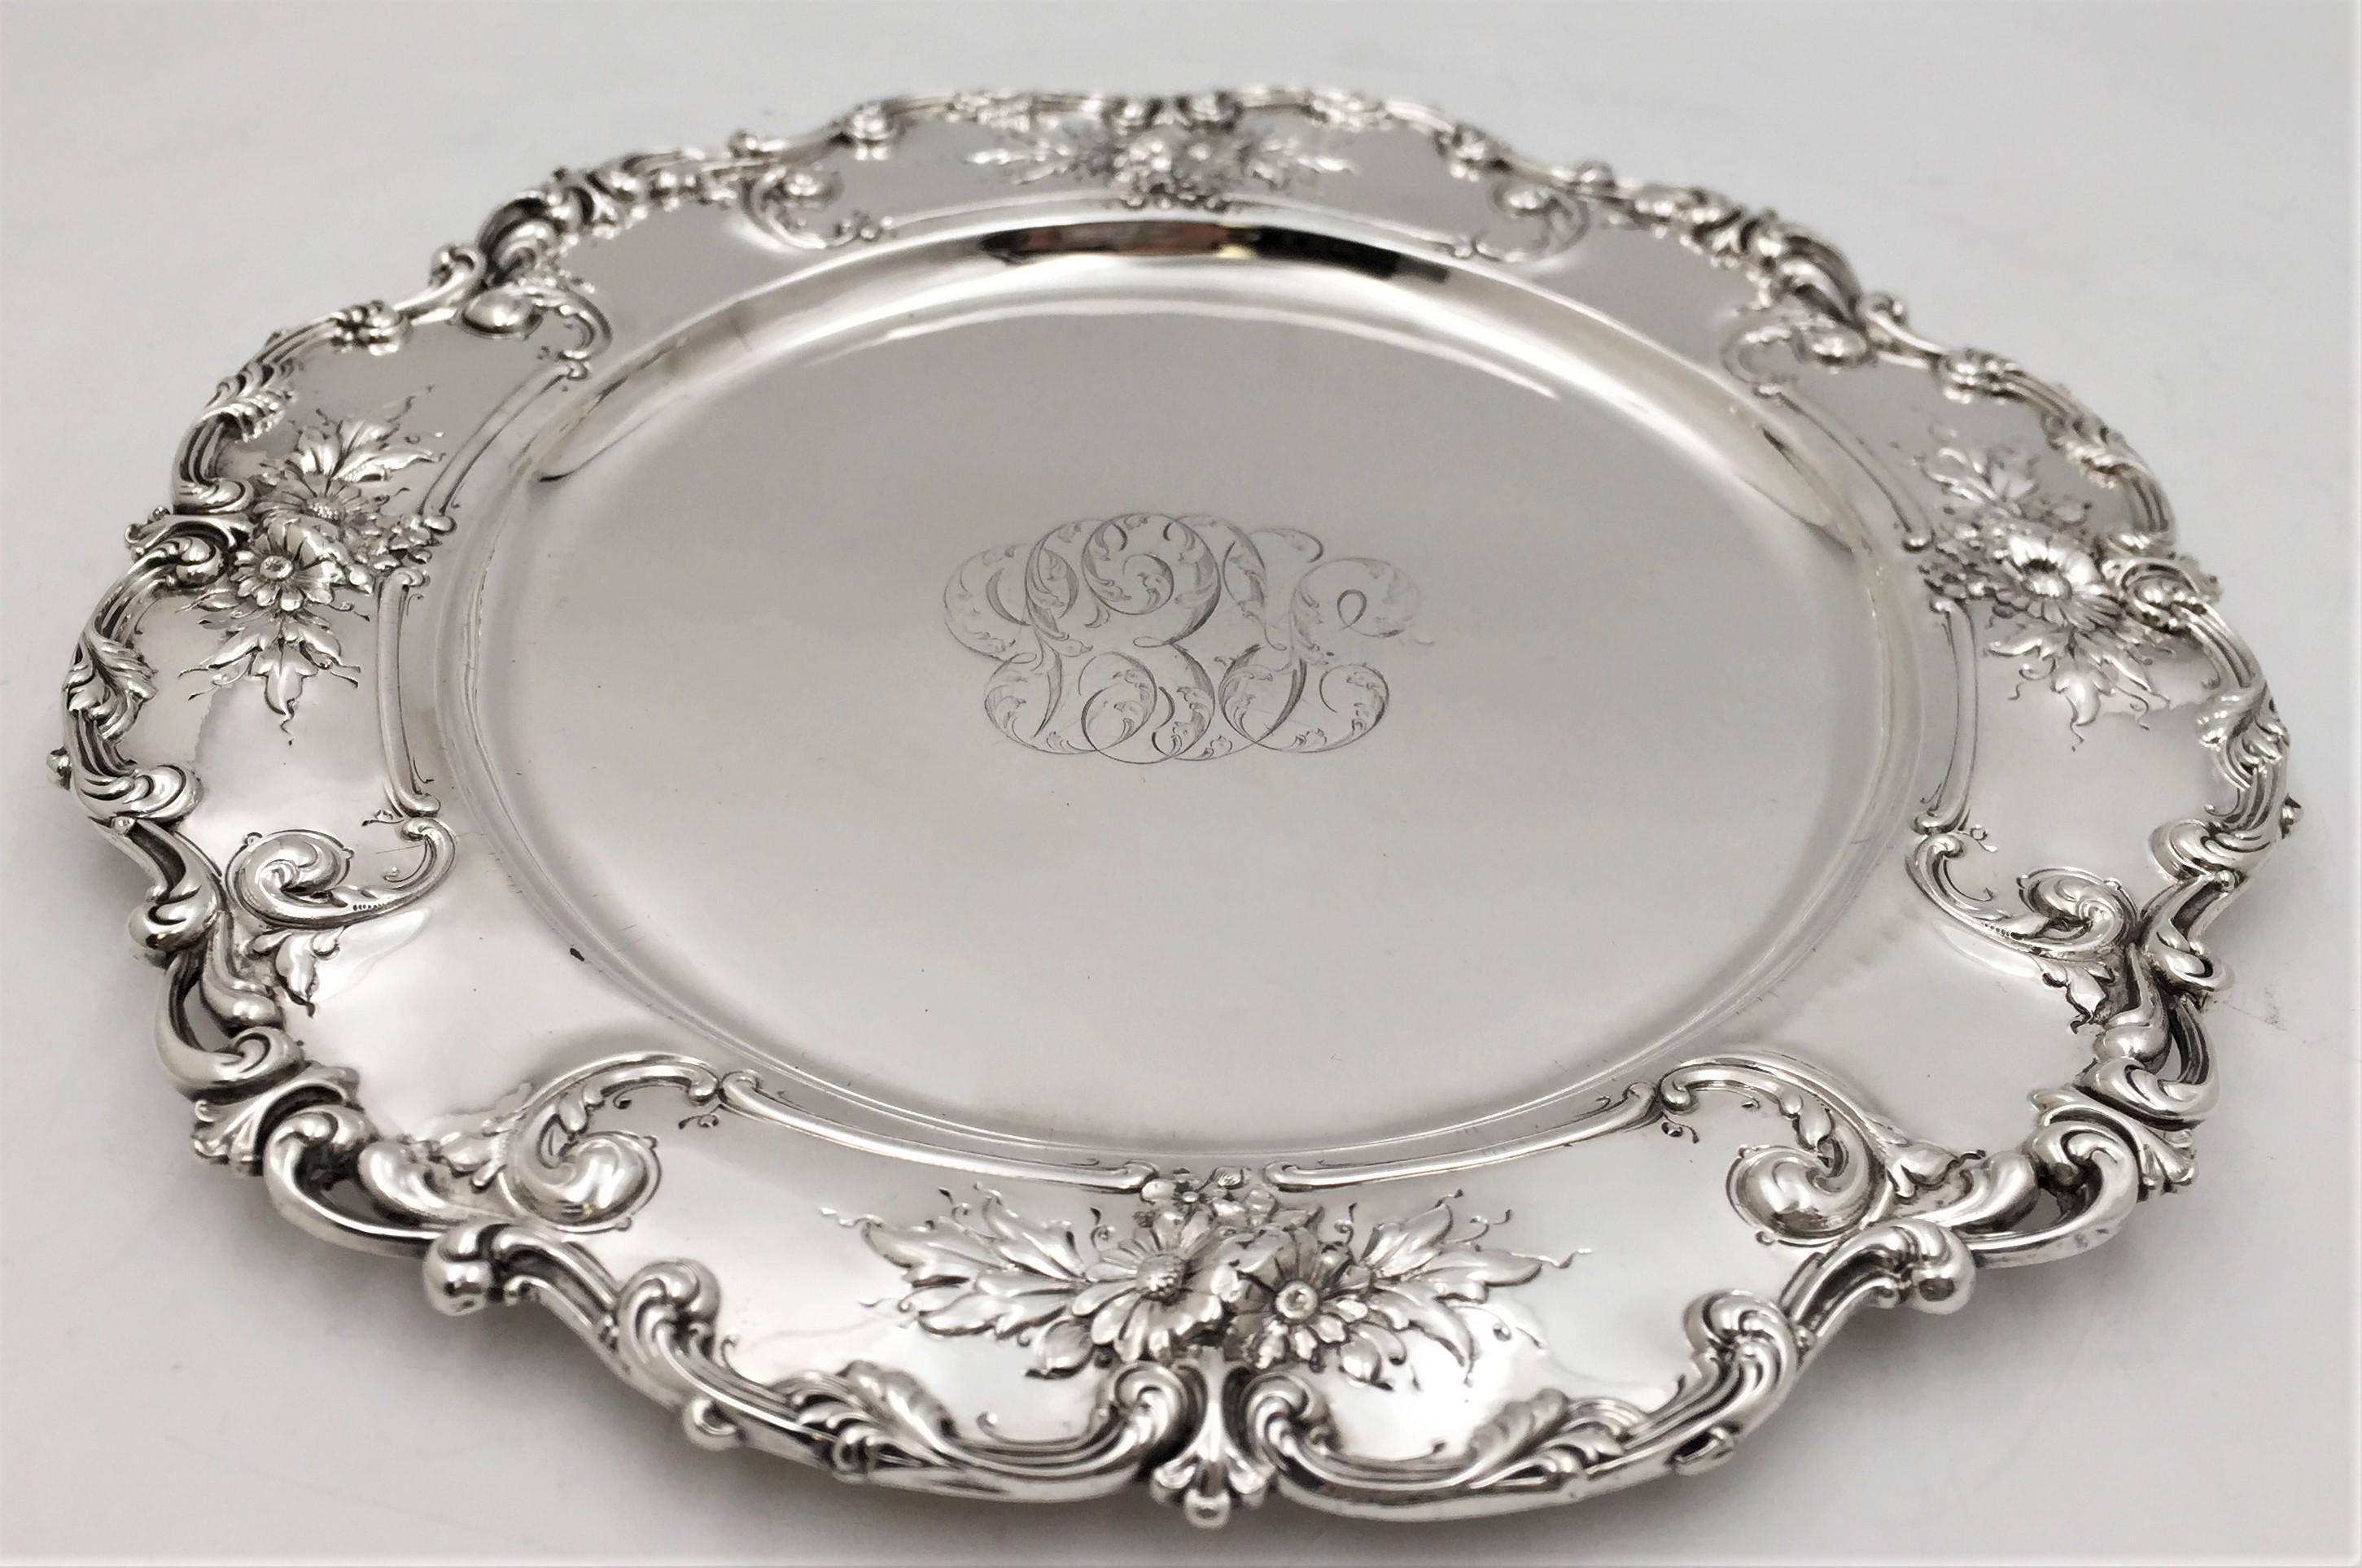 Theodore B. Starr sterling silver round tray/ plate, circa 1900, in a beautiful raised floral pattern typical of the Art Nouveau style. This tray measures 12